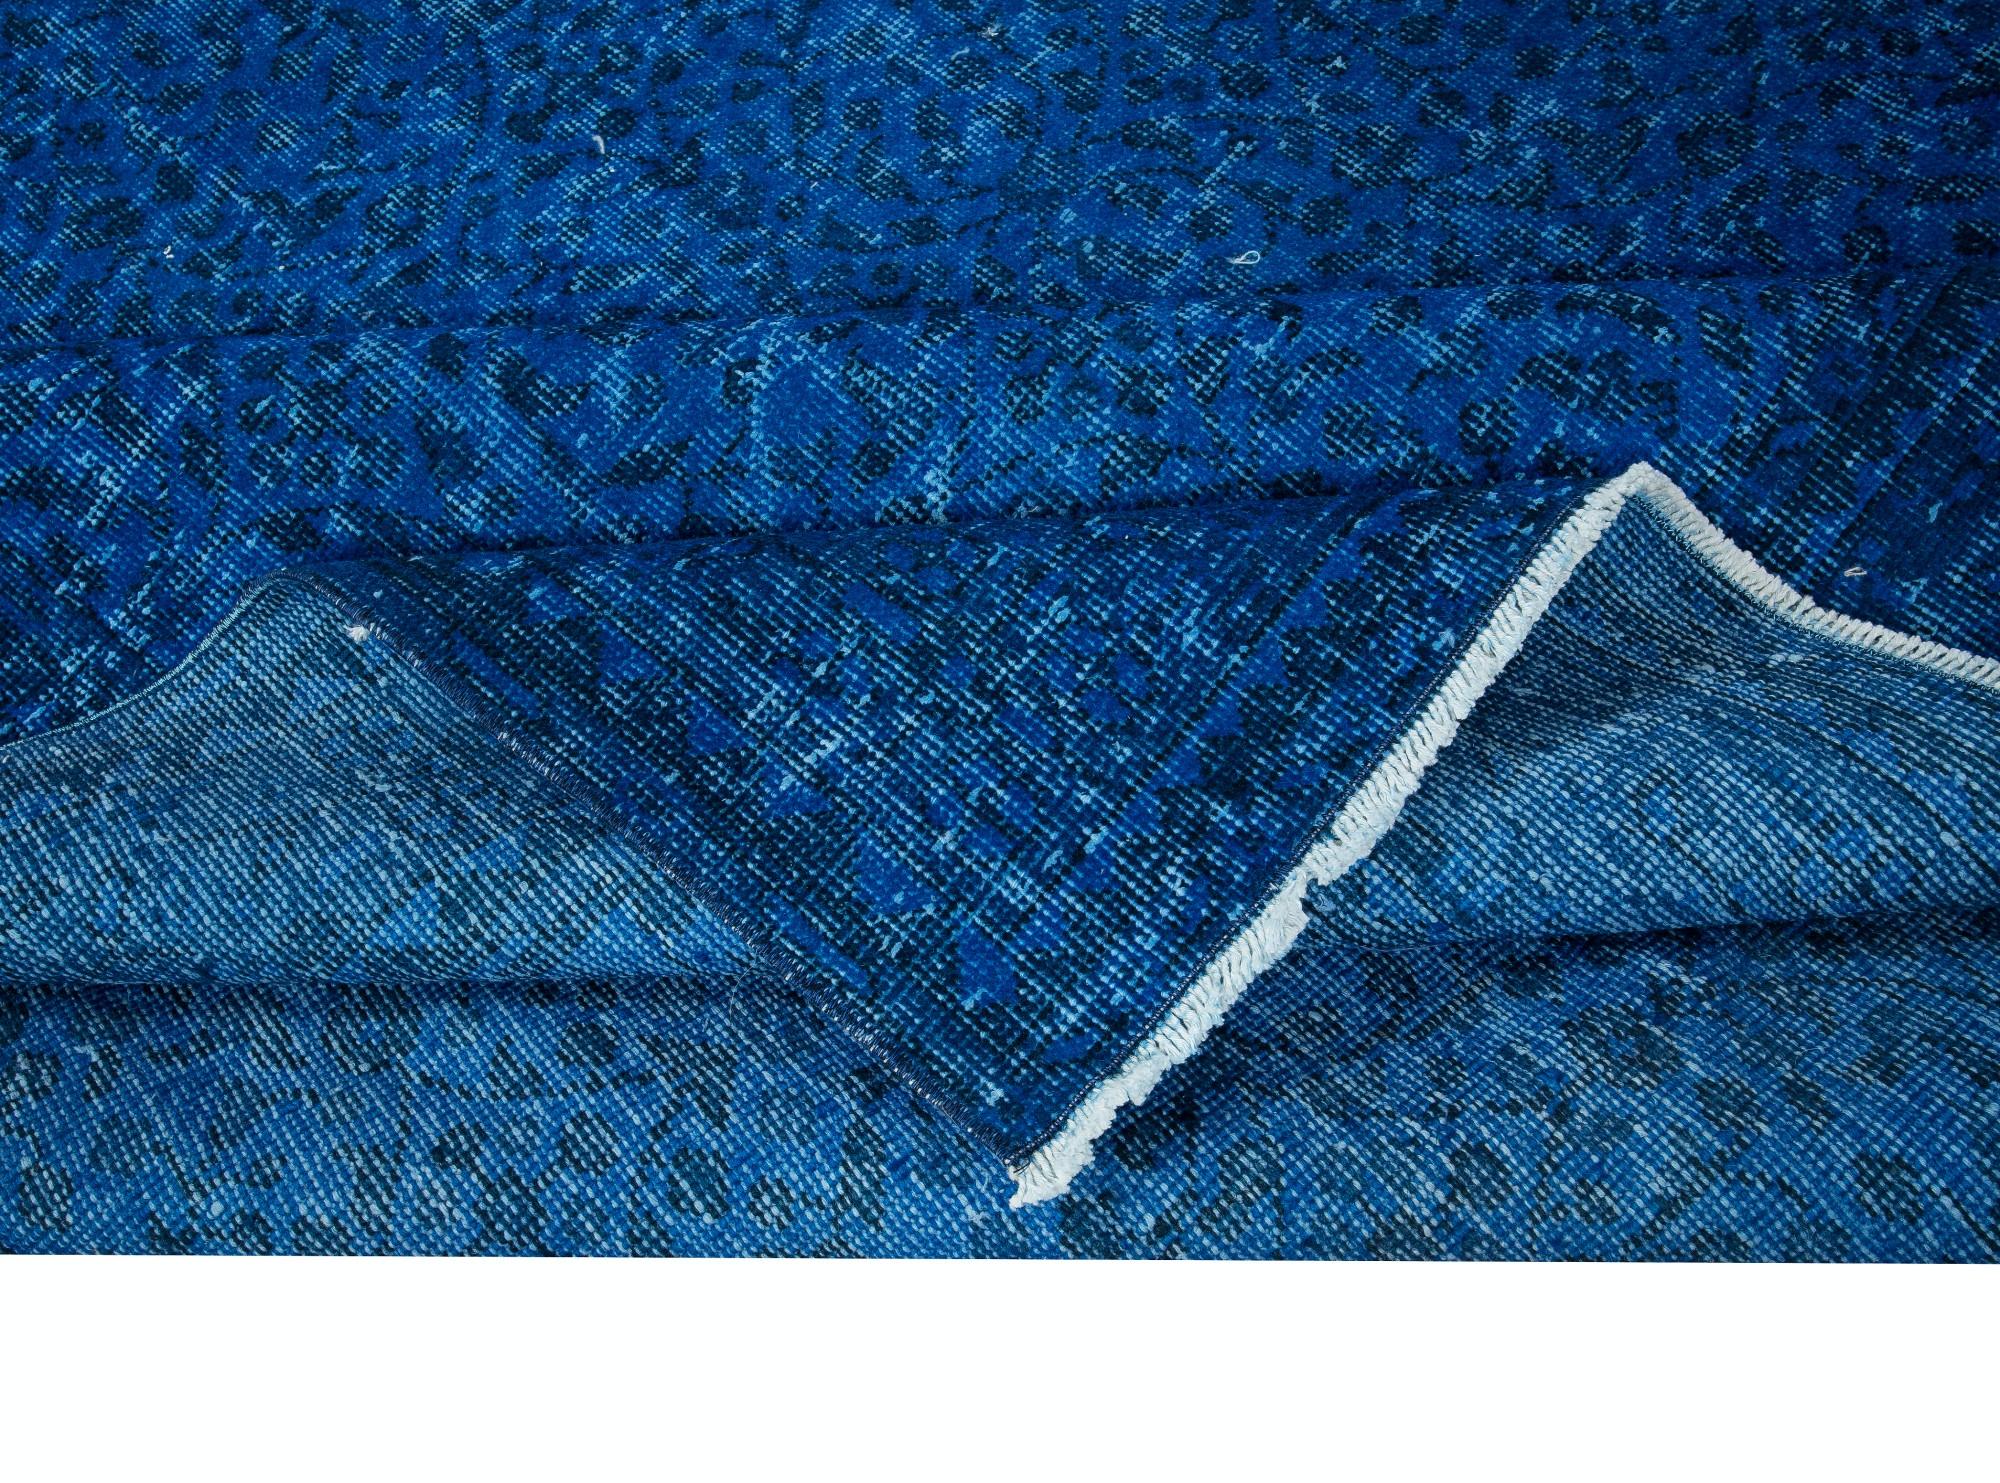 Hand-Woven 7x10 Ft Modern Blue Area Rug made of wool and cotton, Hand-Knotted in Turkey For Sale